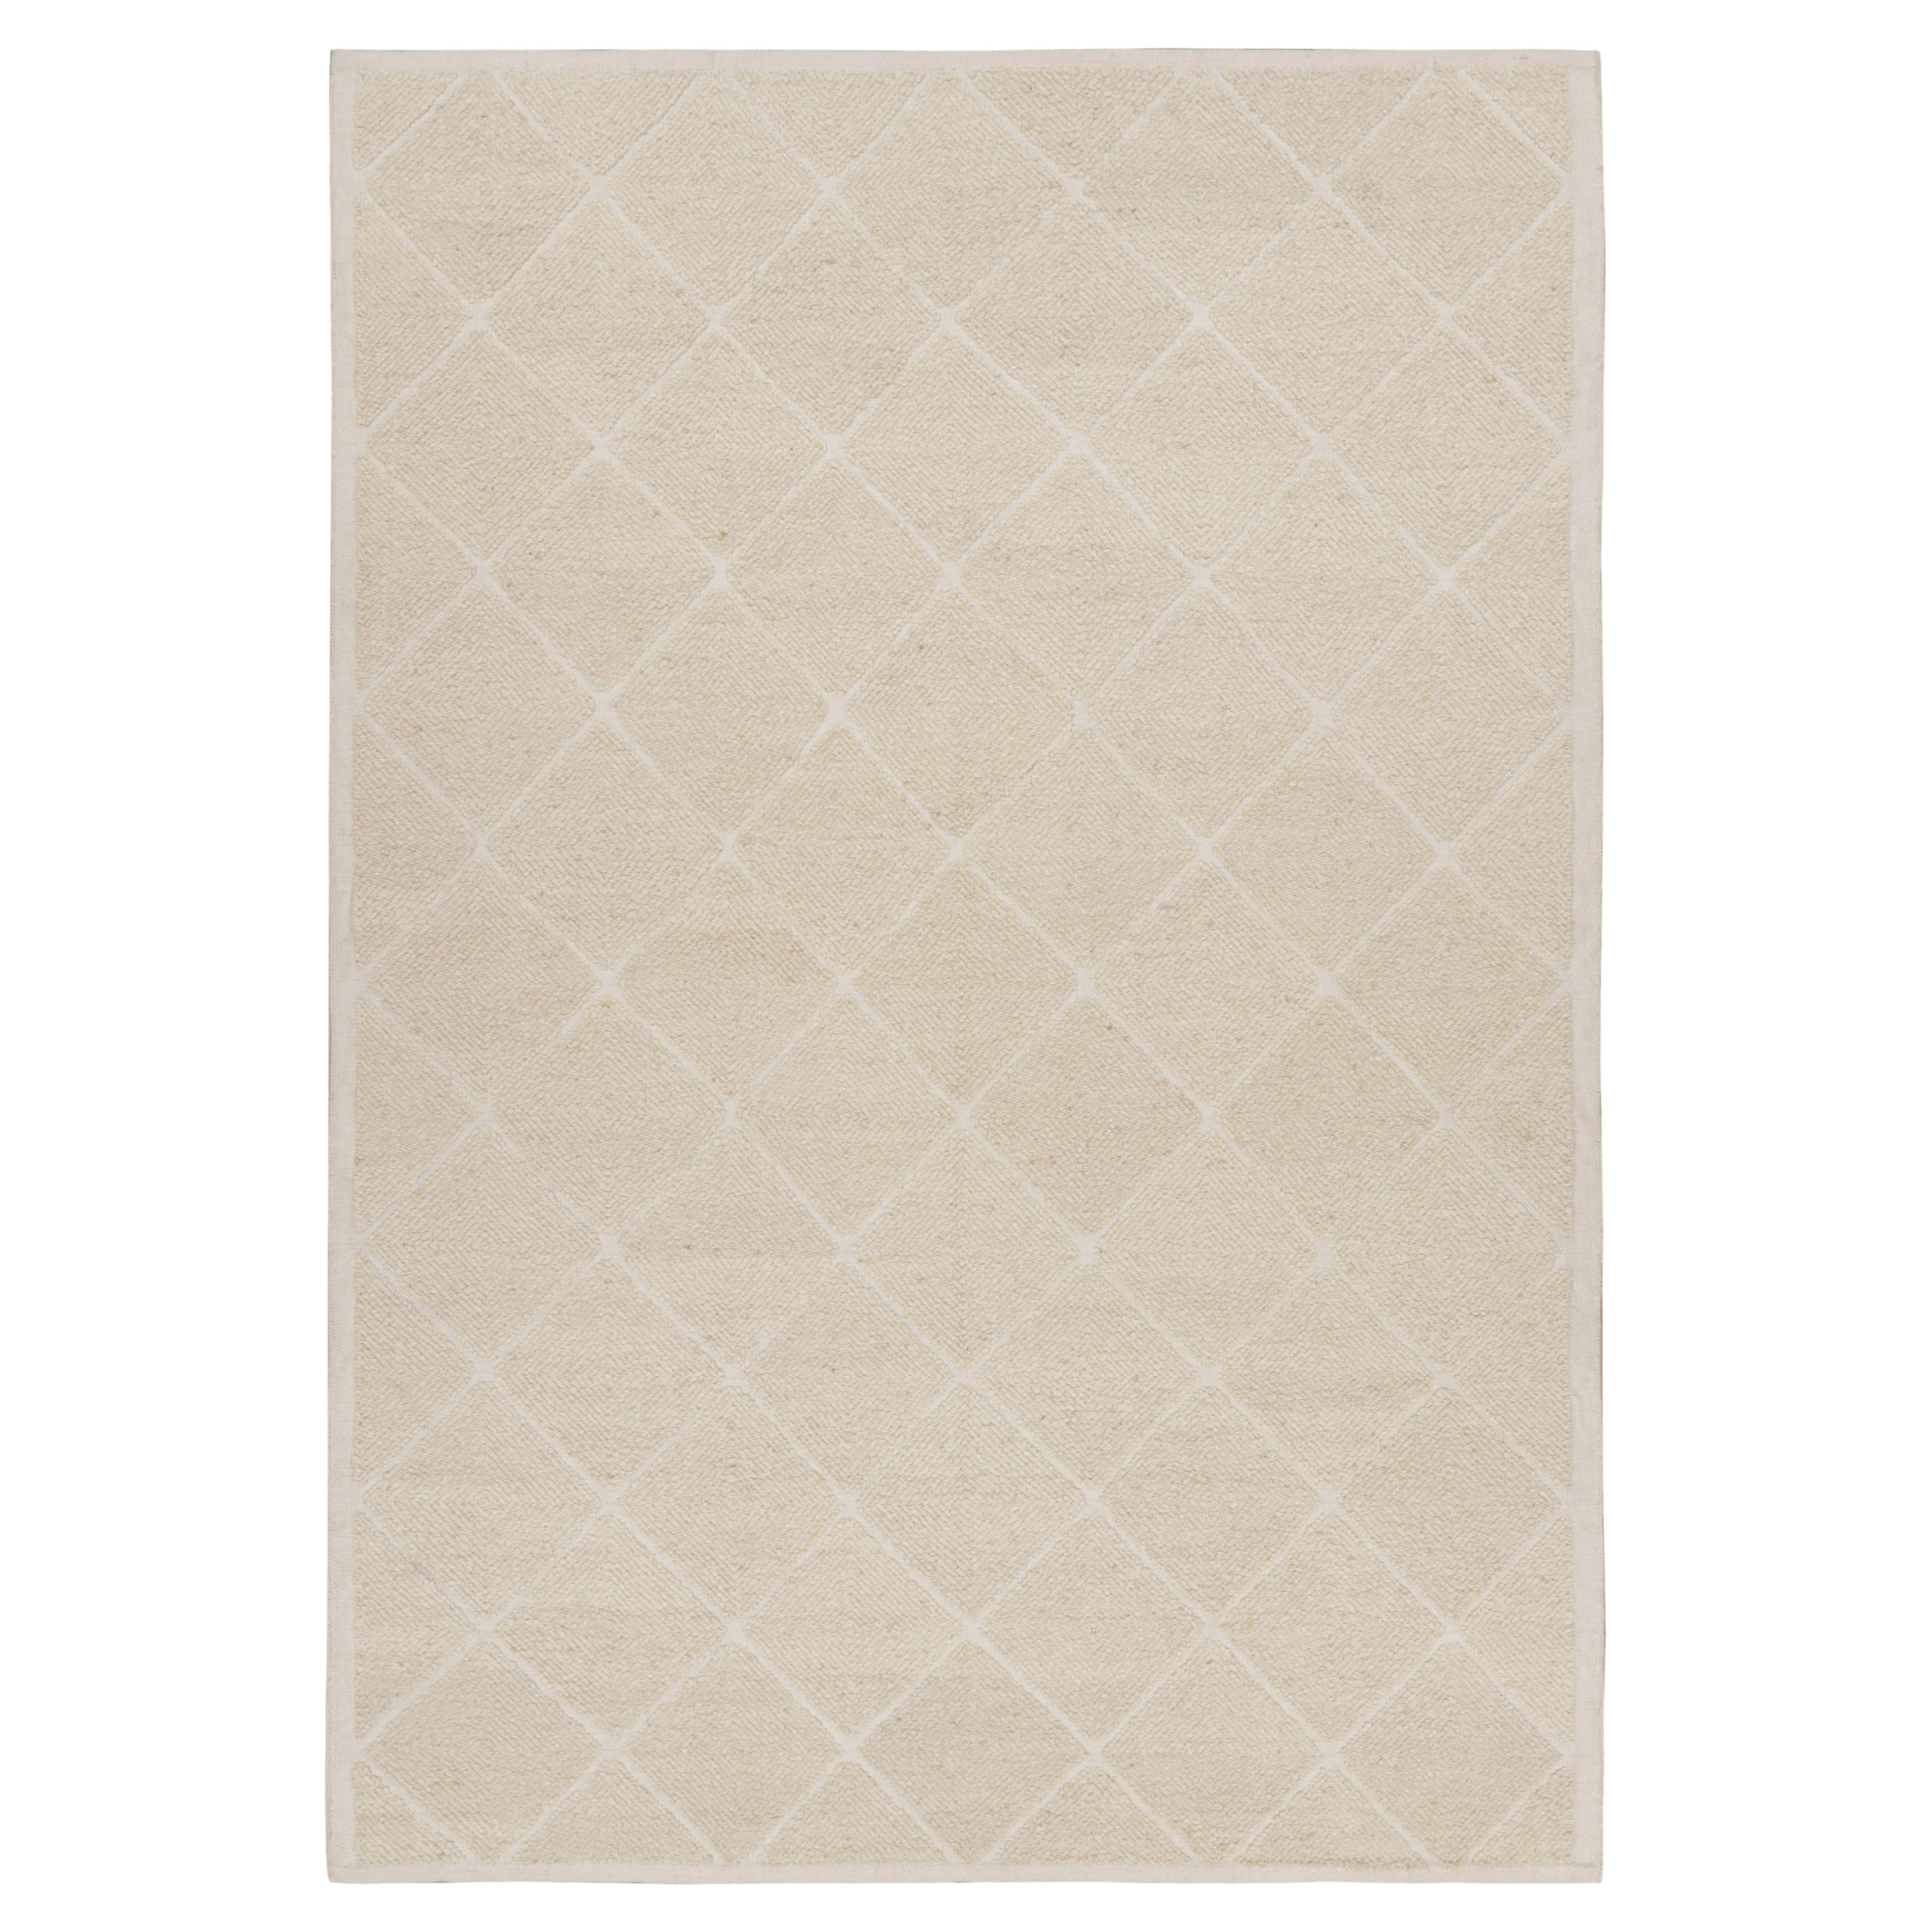 Rug & Kilim’s Scandinavian Style Rug in White with Diamond Lattice Patterns For Sale